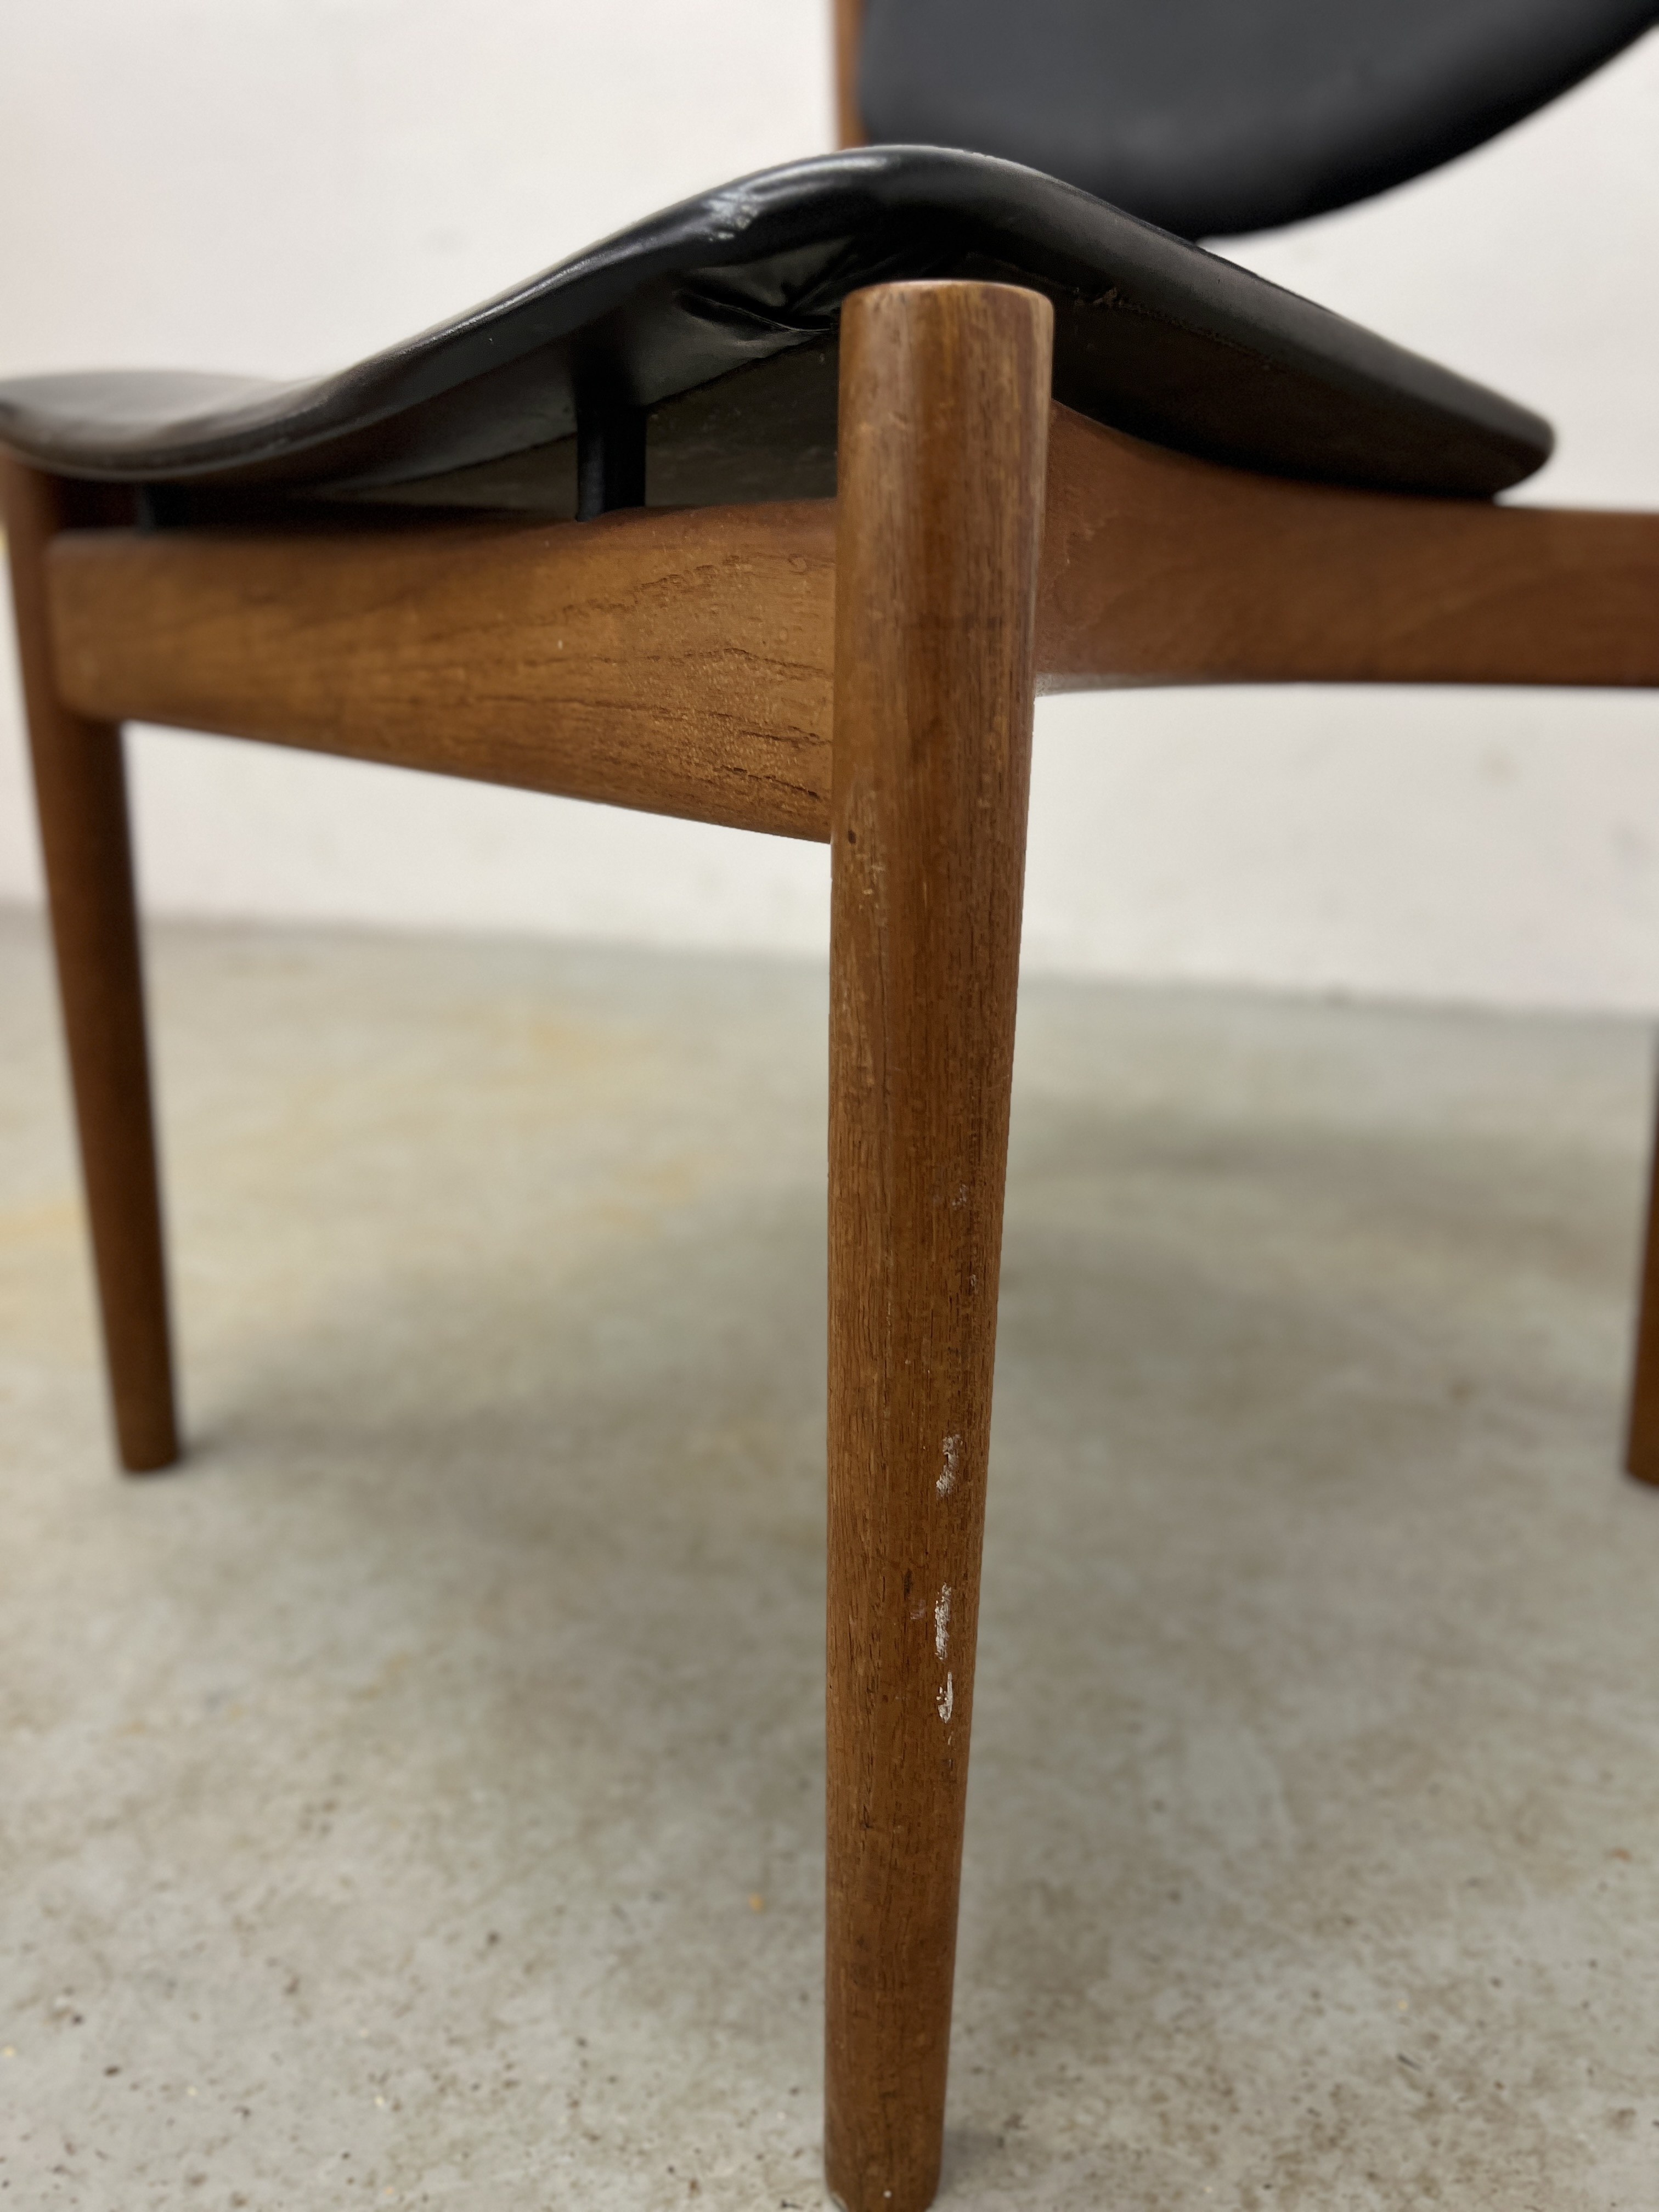 A MID CENTURY DANISH TEAK SIDE CHAIR BEARING LABEL FRANCE & SON. DESIGNED BY FIN JUHL A/F NO. - Image 4 of 10